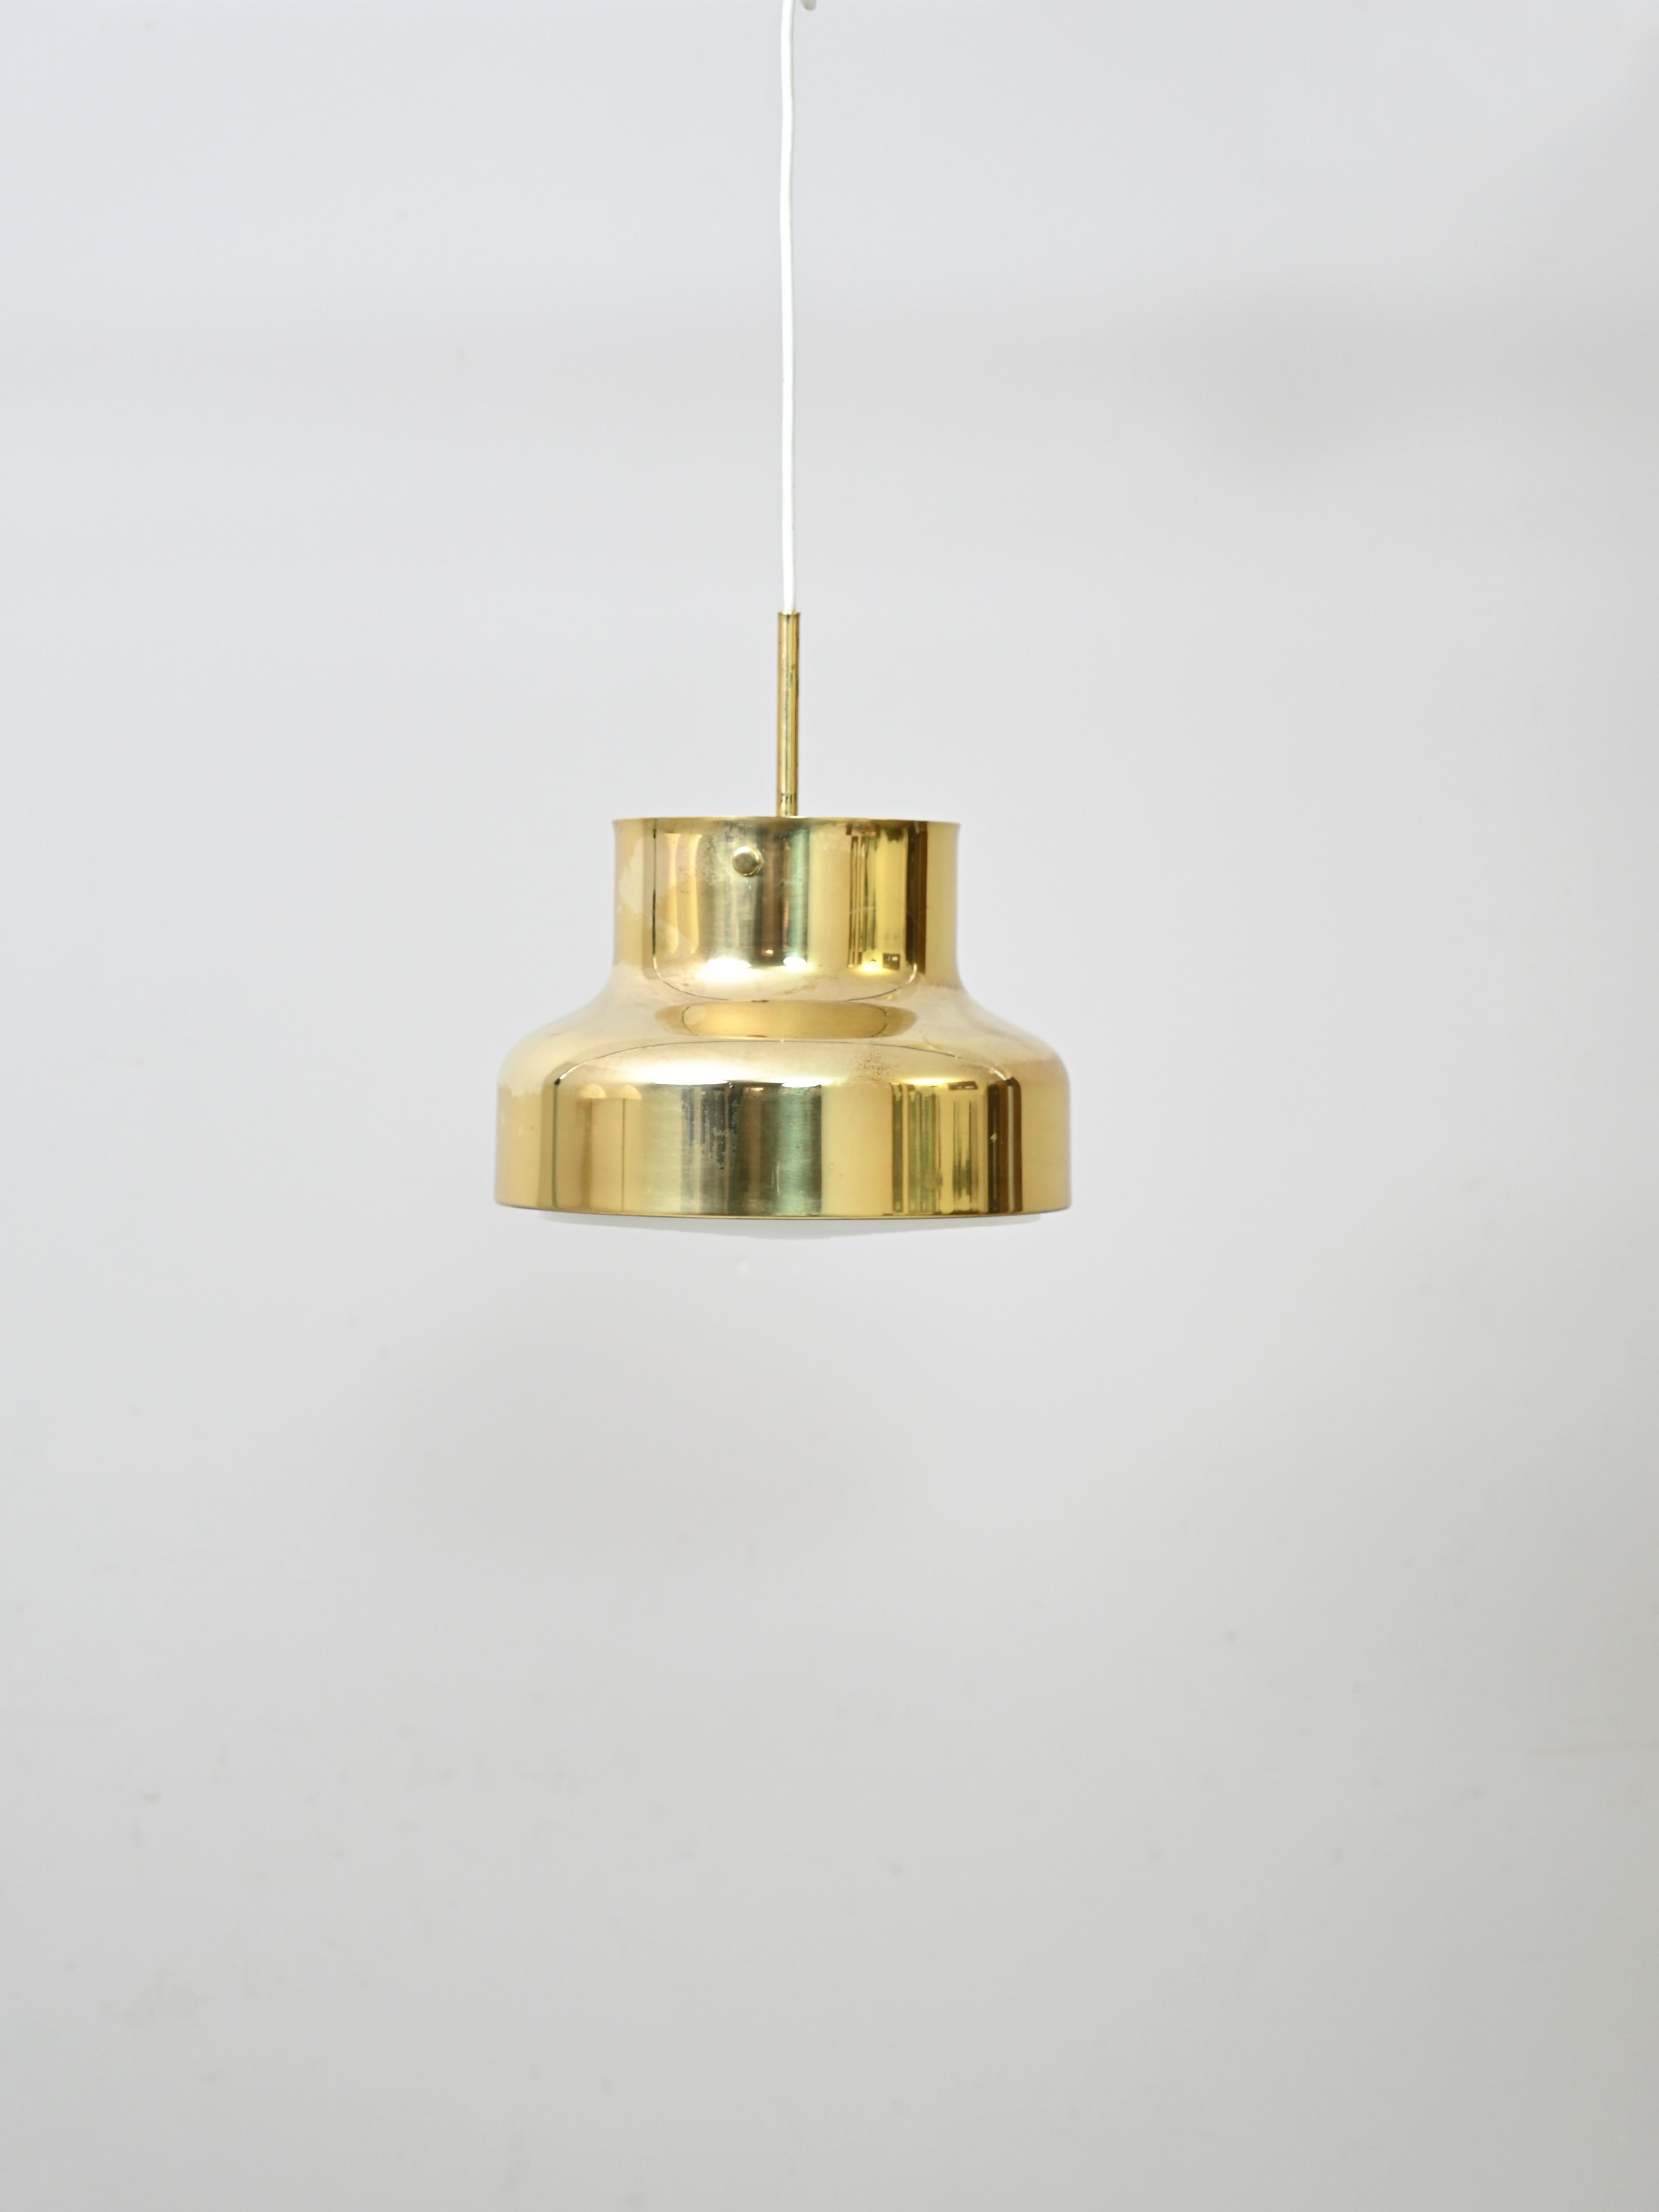 Golden hanging lamp
The Bumling lamp series was designed by Anders Pehrson for Ateljé Lyktan in Åhus in the
late 1960s.
This is the smaller brass version with a diameter of 25 cm.
Light is filtered and diffused thanks to the plastic grid that is